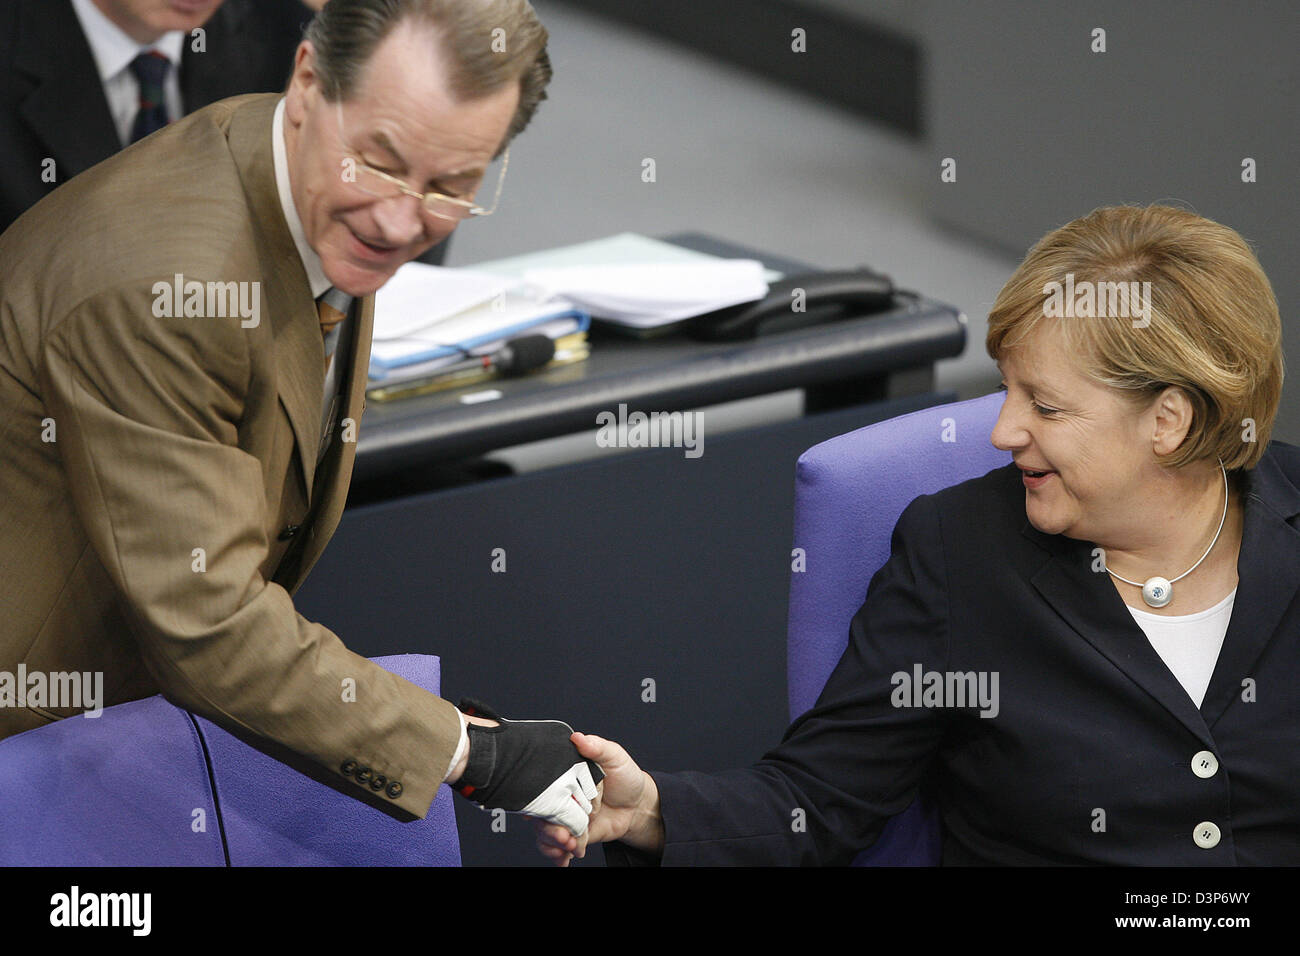 German Chancellor Angela Merkel (R) and Minister of Labour and Social Affairs Franz Muentefering shake hands during the parliamentary debate about the planned military deployment in Lebanon at the German Bundestag in Berlin, Germany, Wednesday, 20 September 2006. Germany's parliament agreed Wednesday to contribute warships to a UN force for Lebanon in the first military deployment  Stock Photo